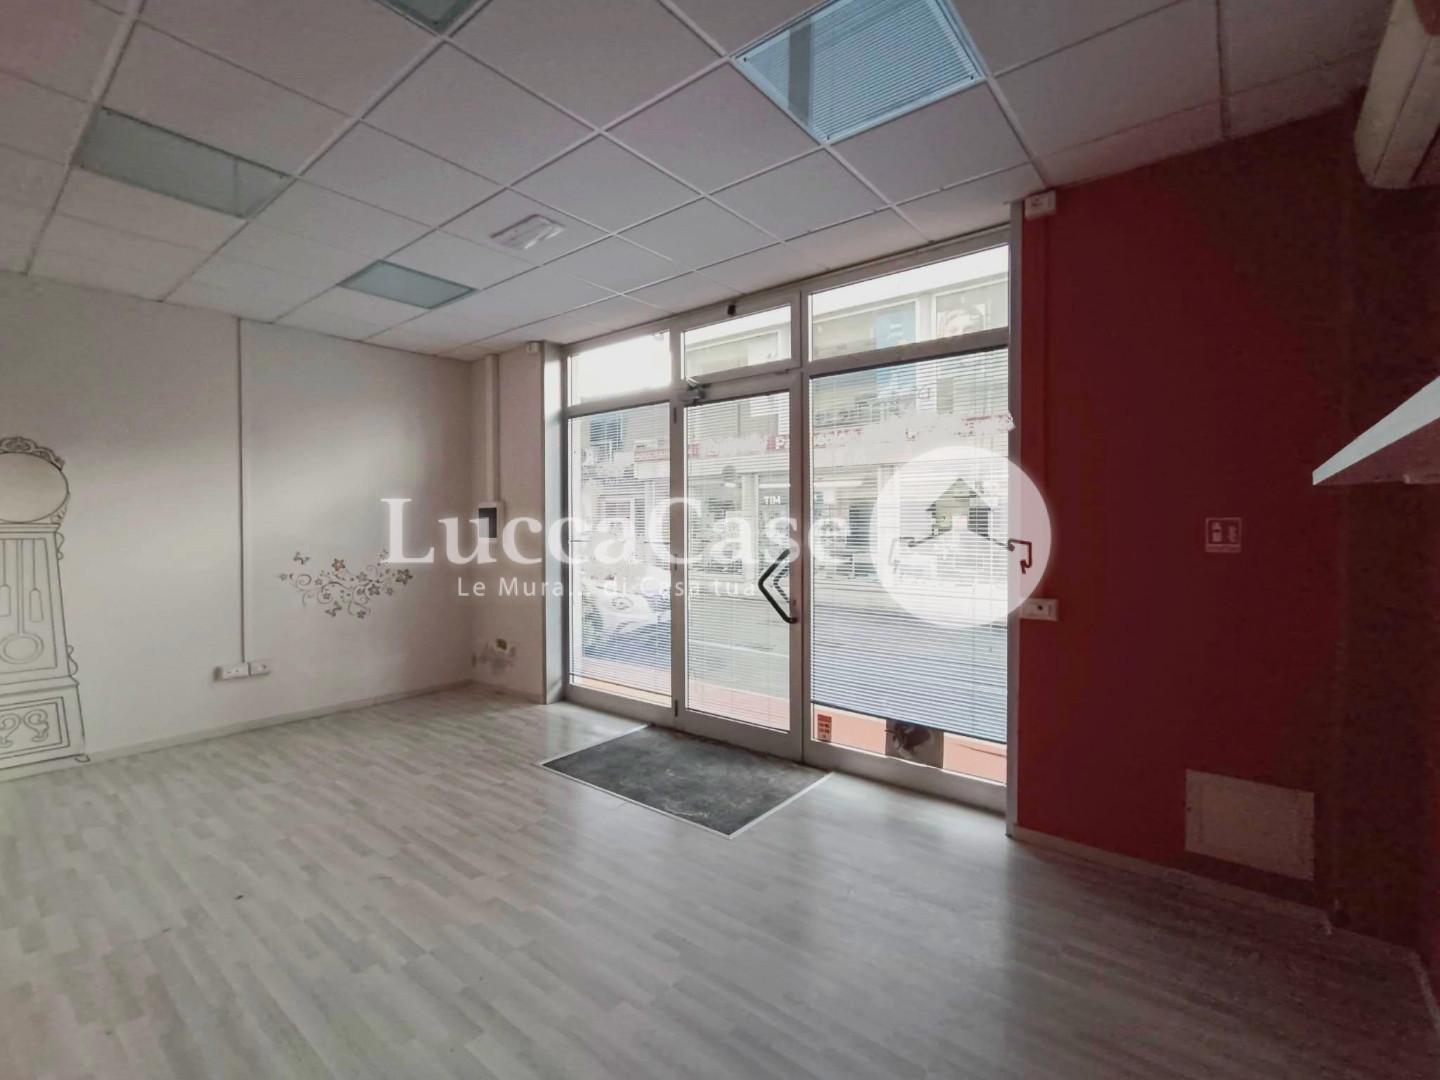 Office for commercial rentals, ref. F322K